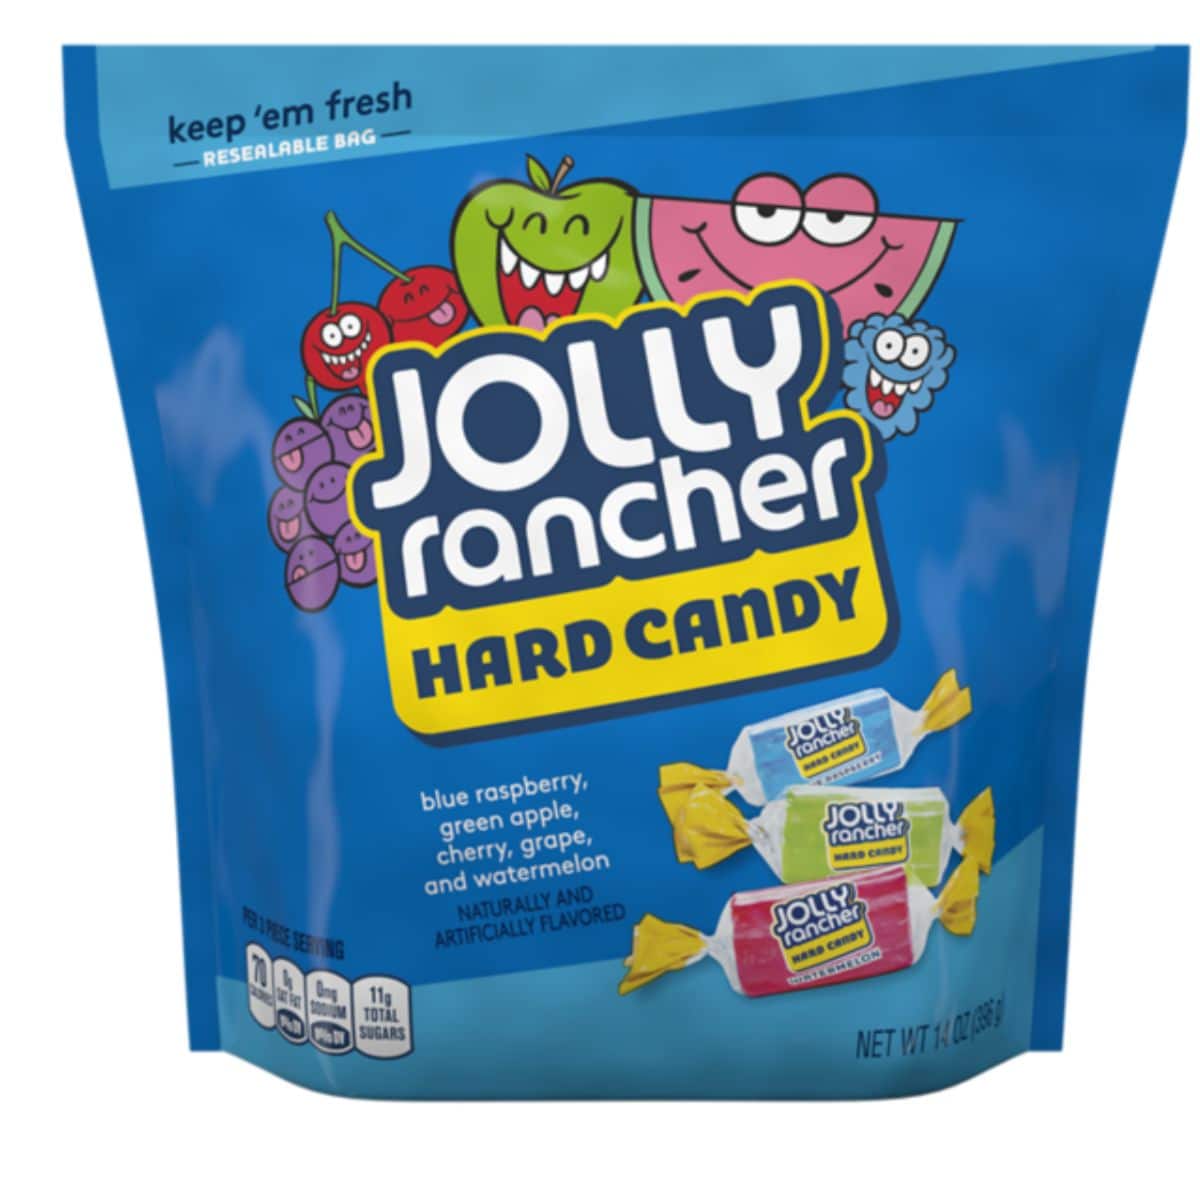 A blue bag of jolly ranchers candy.